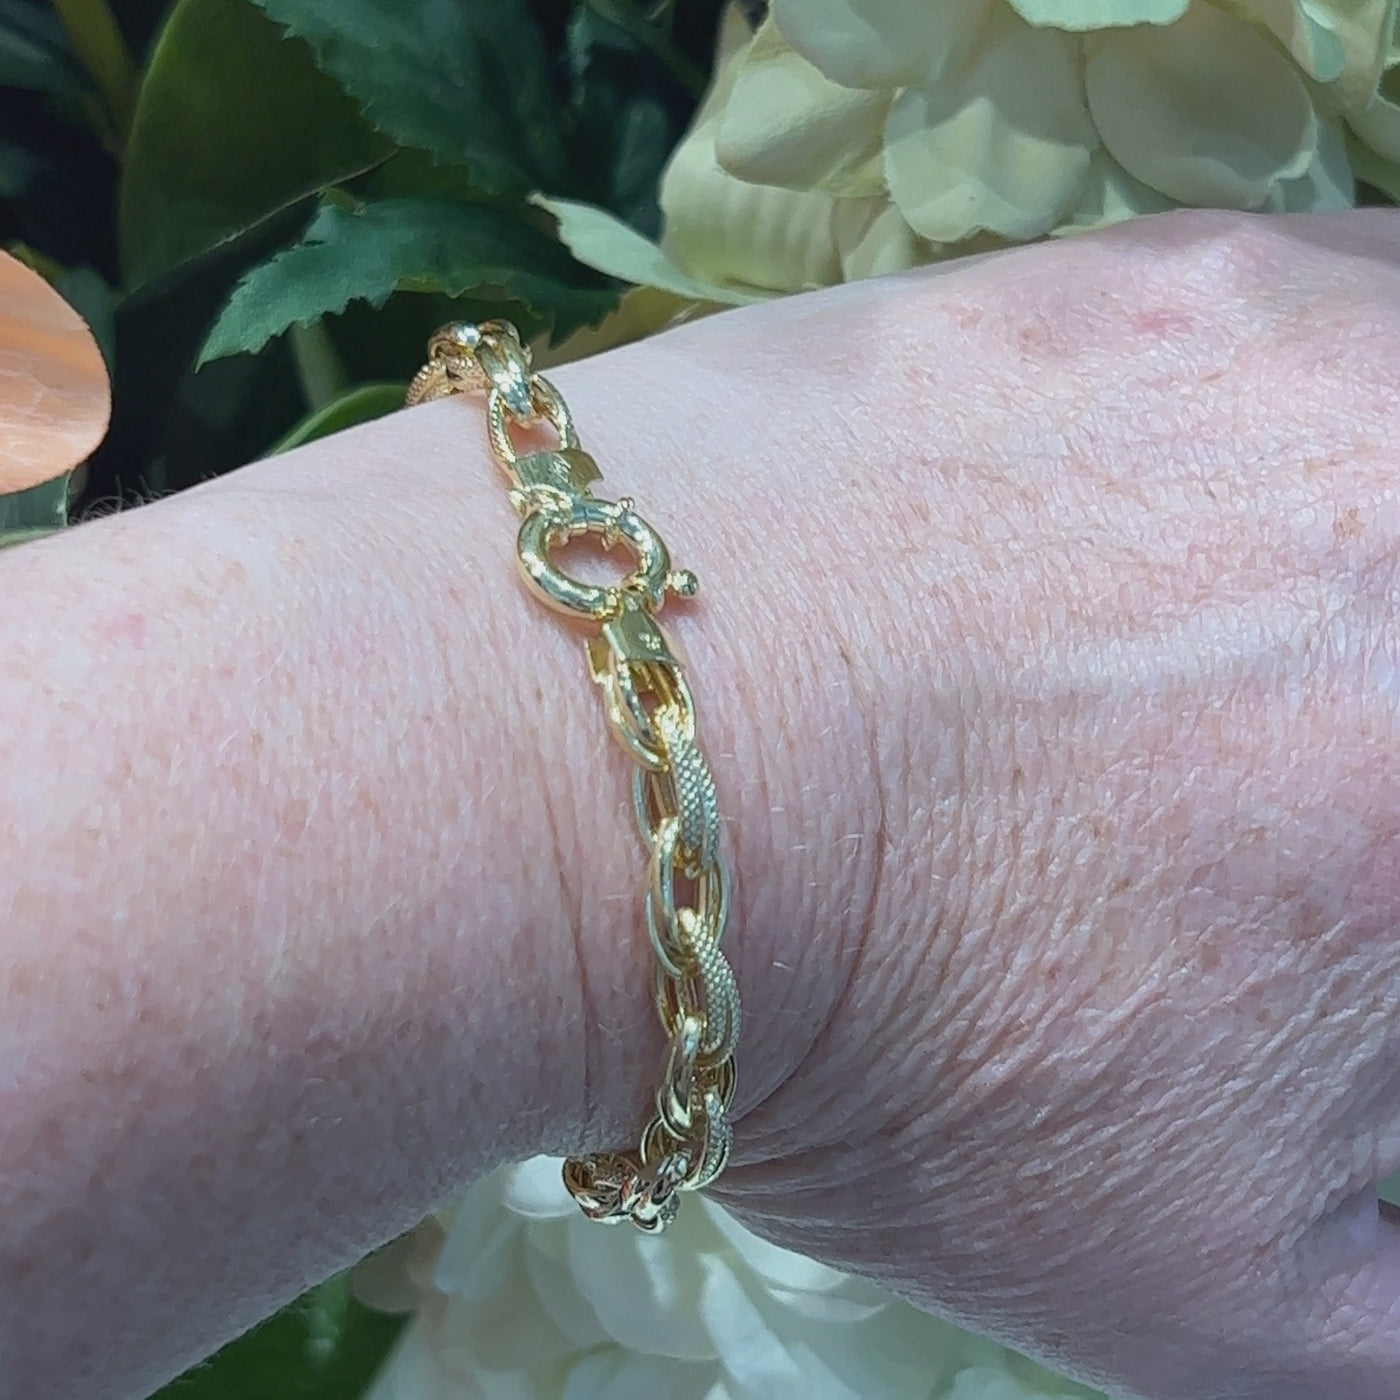 9ct Yellow Gold Double Hollow Link Bracelet.